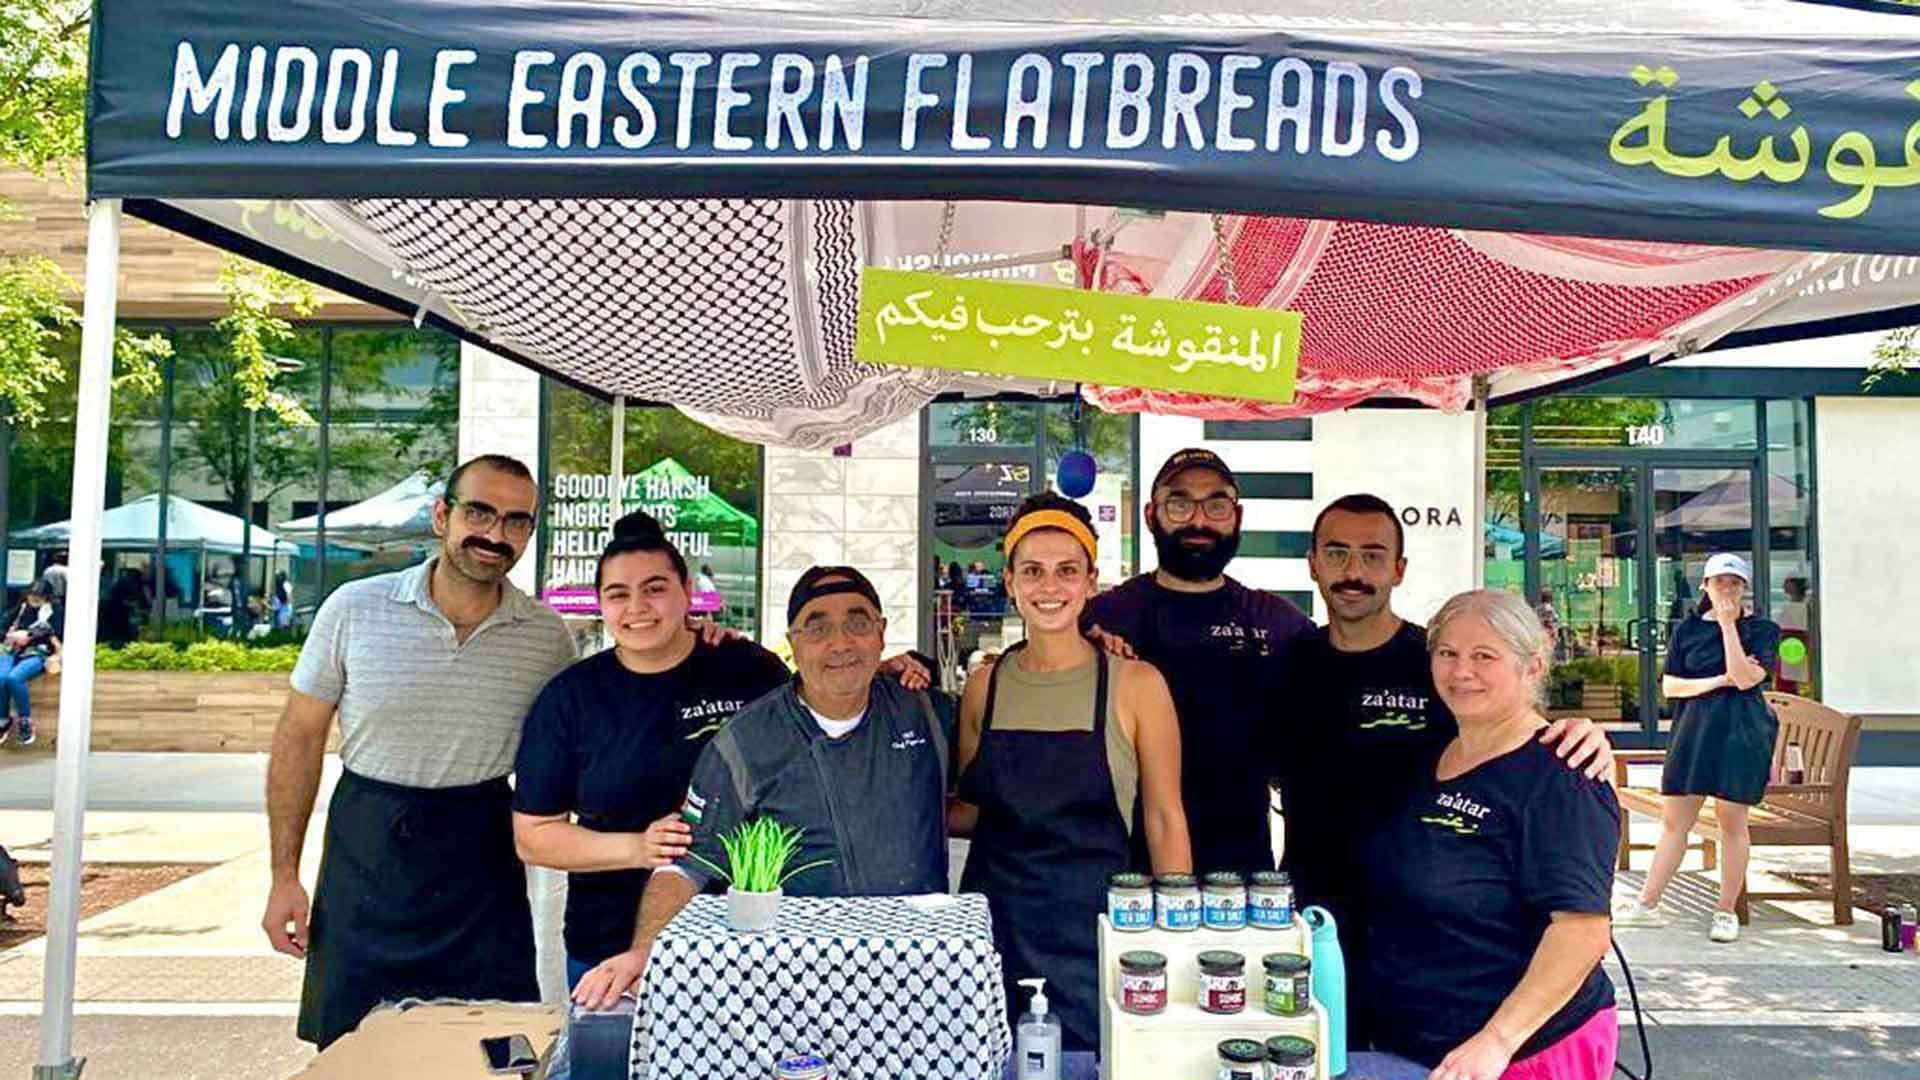 Dubbaneh family at a farmers market with tent that says, "Middle Eastern Flatbreads"